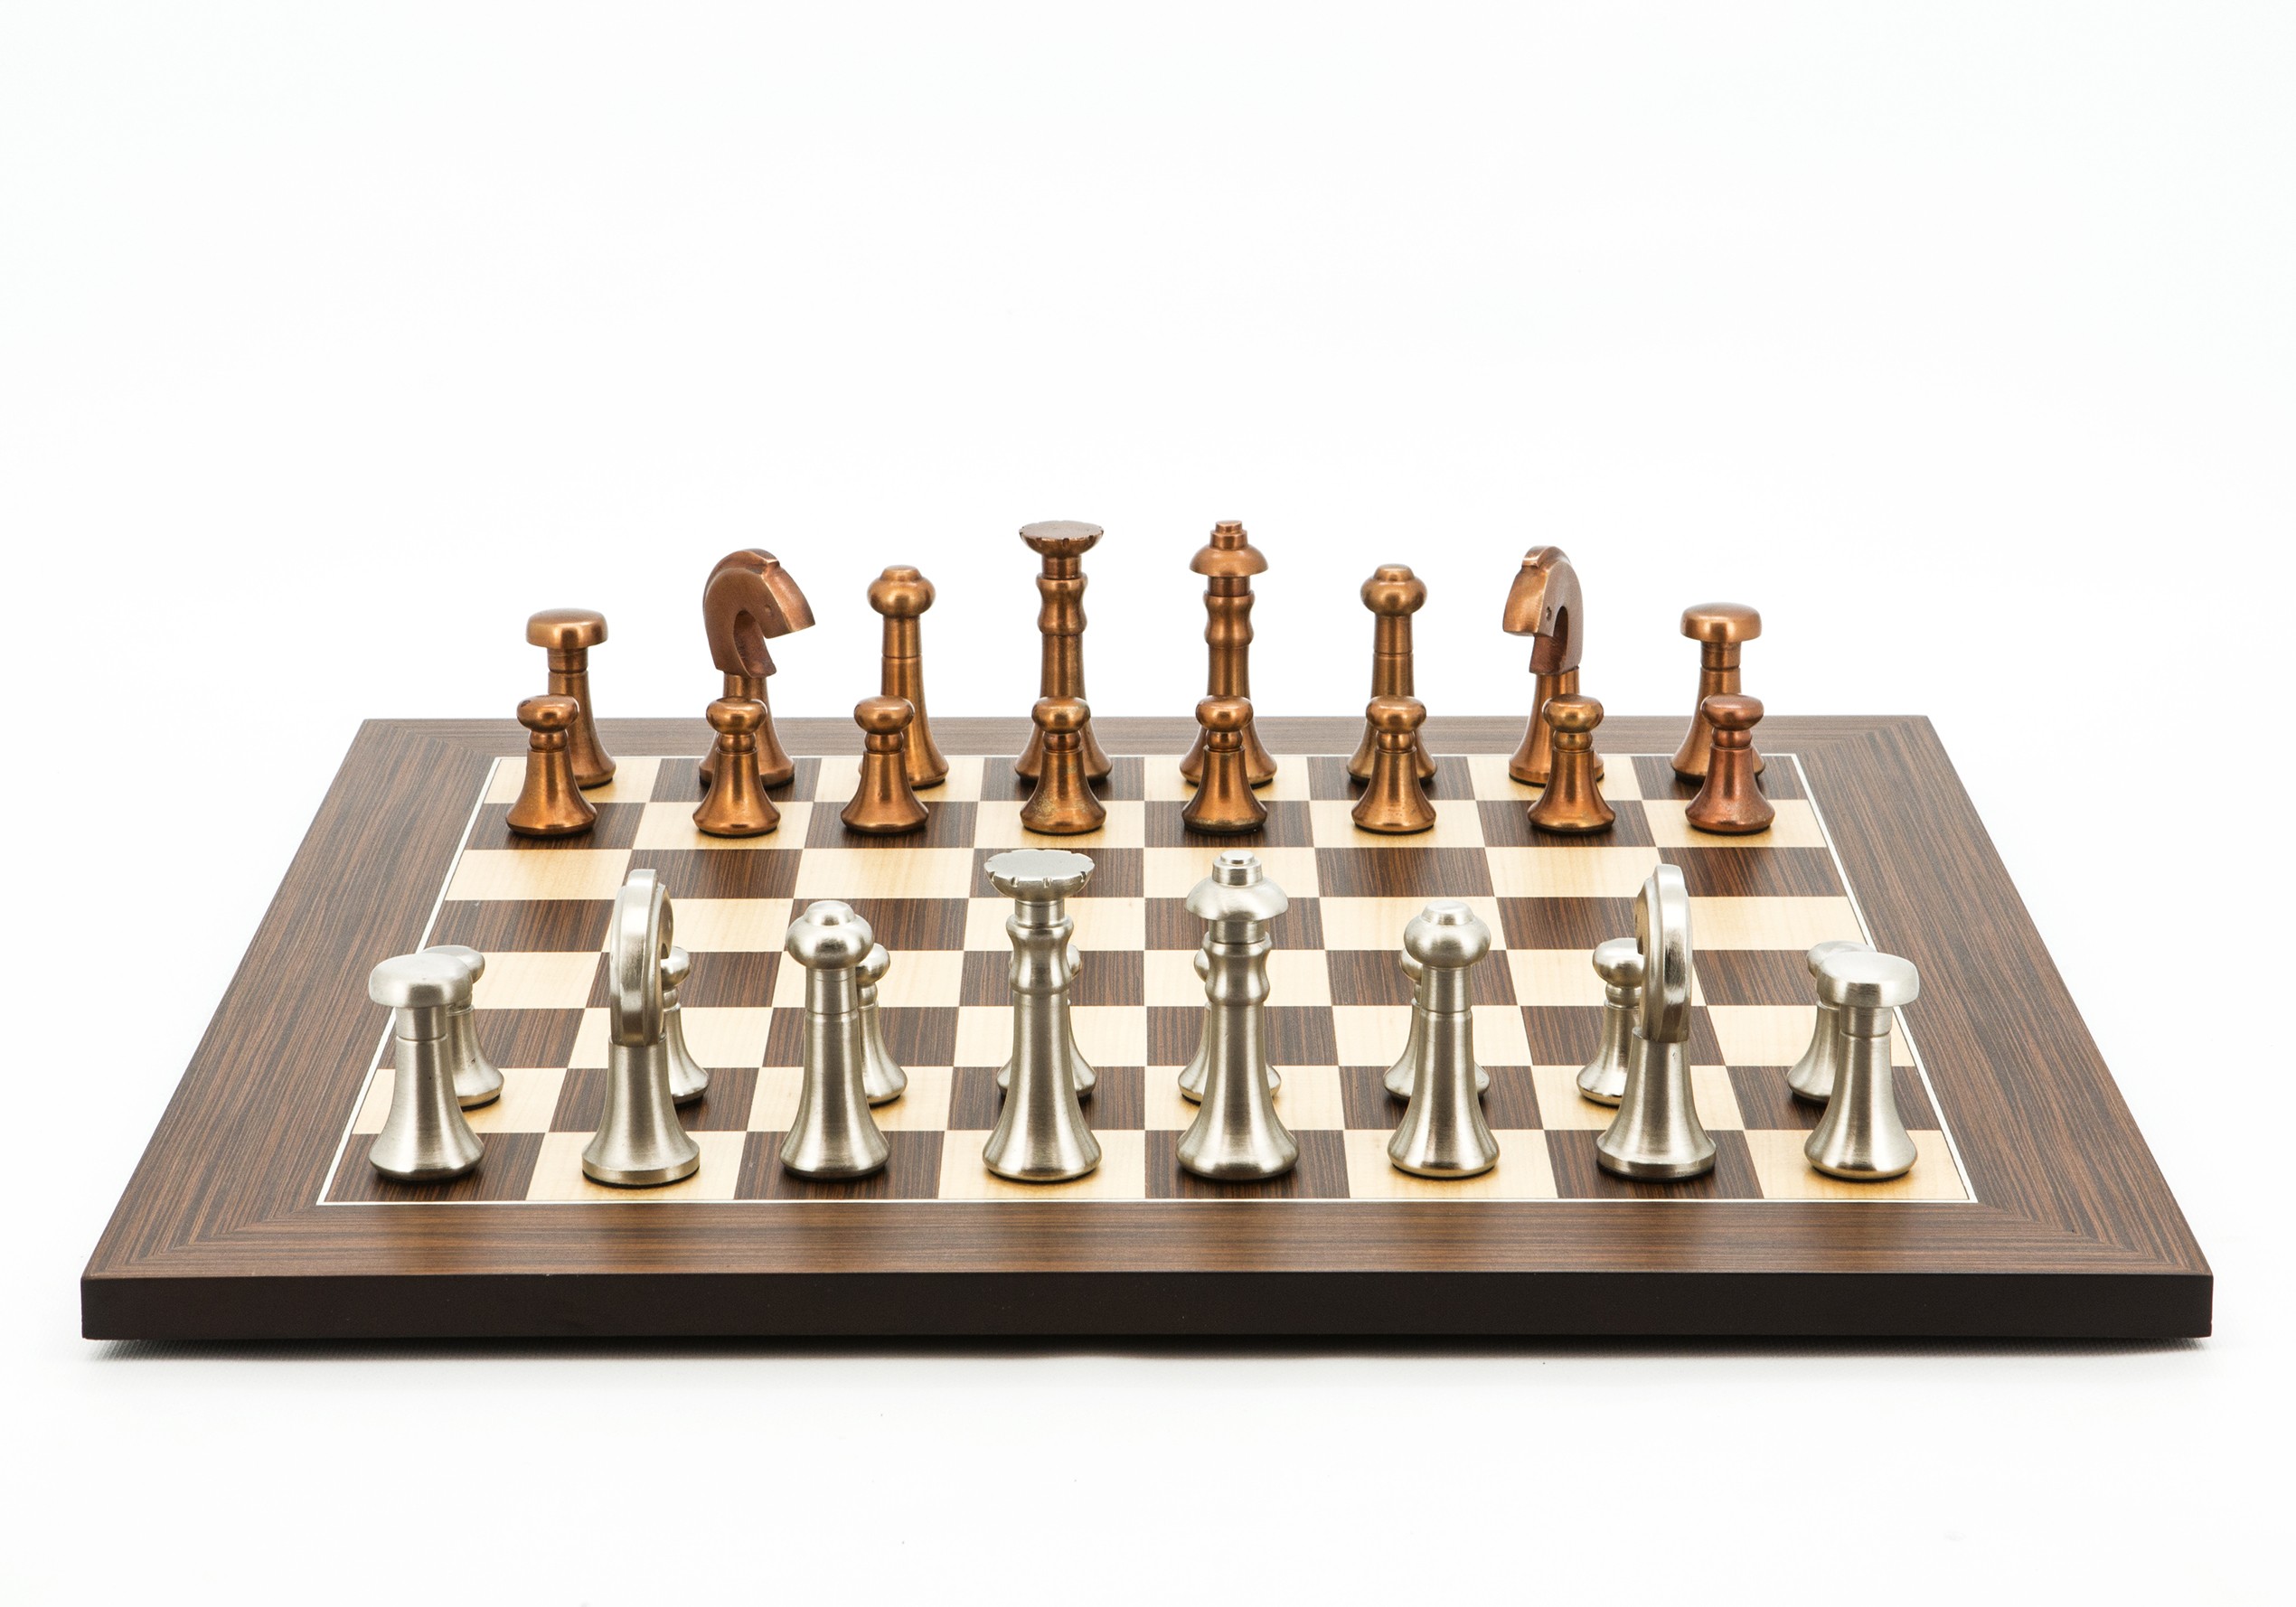 Dal Rossi Italy Chess Set Palisander / Maple Flat Board 50cm, With Metal Copper and silver Chessmen 80mm